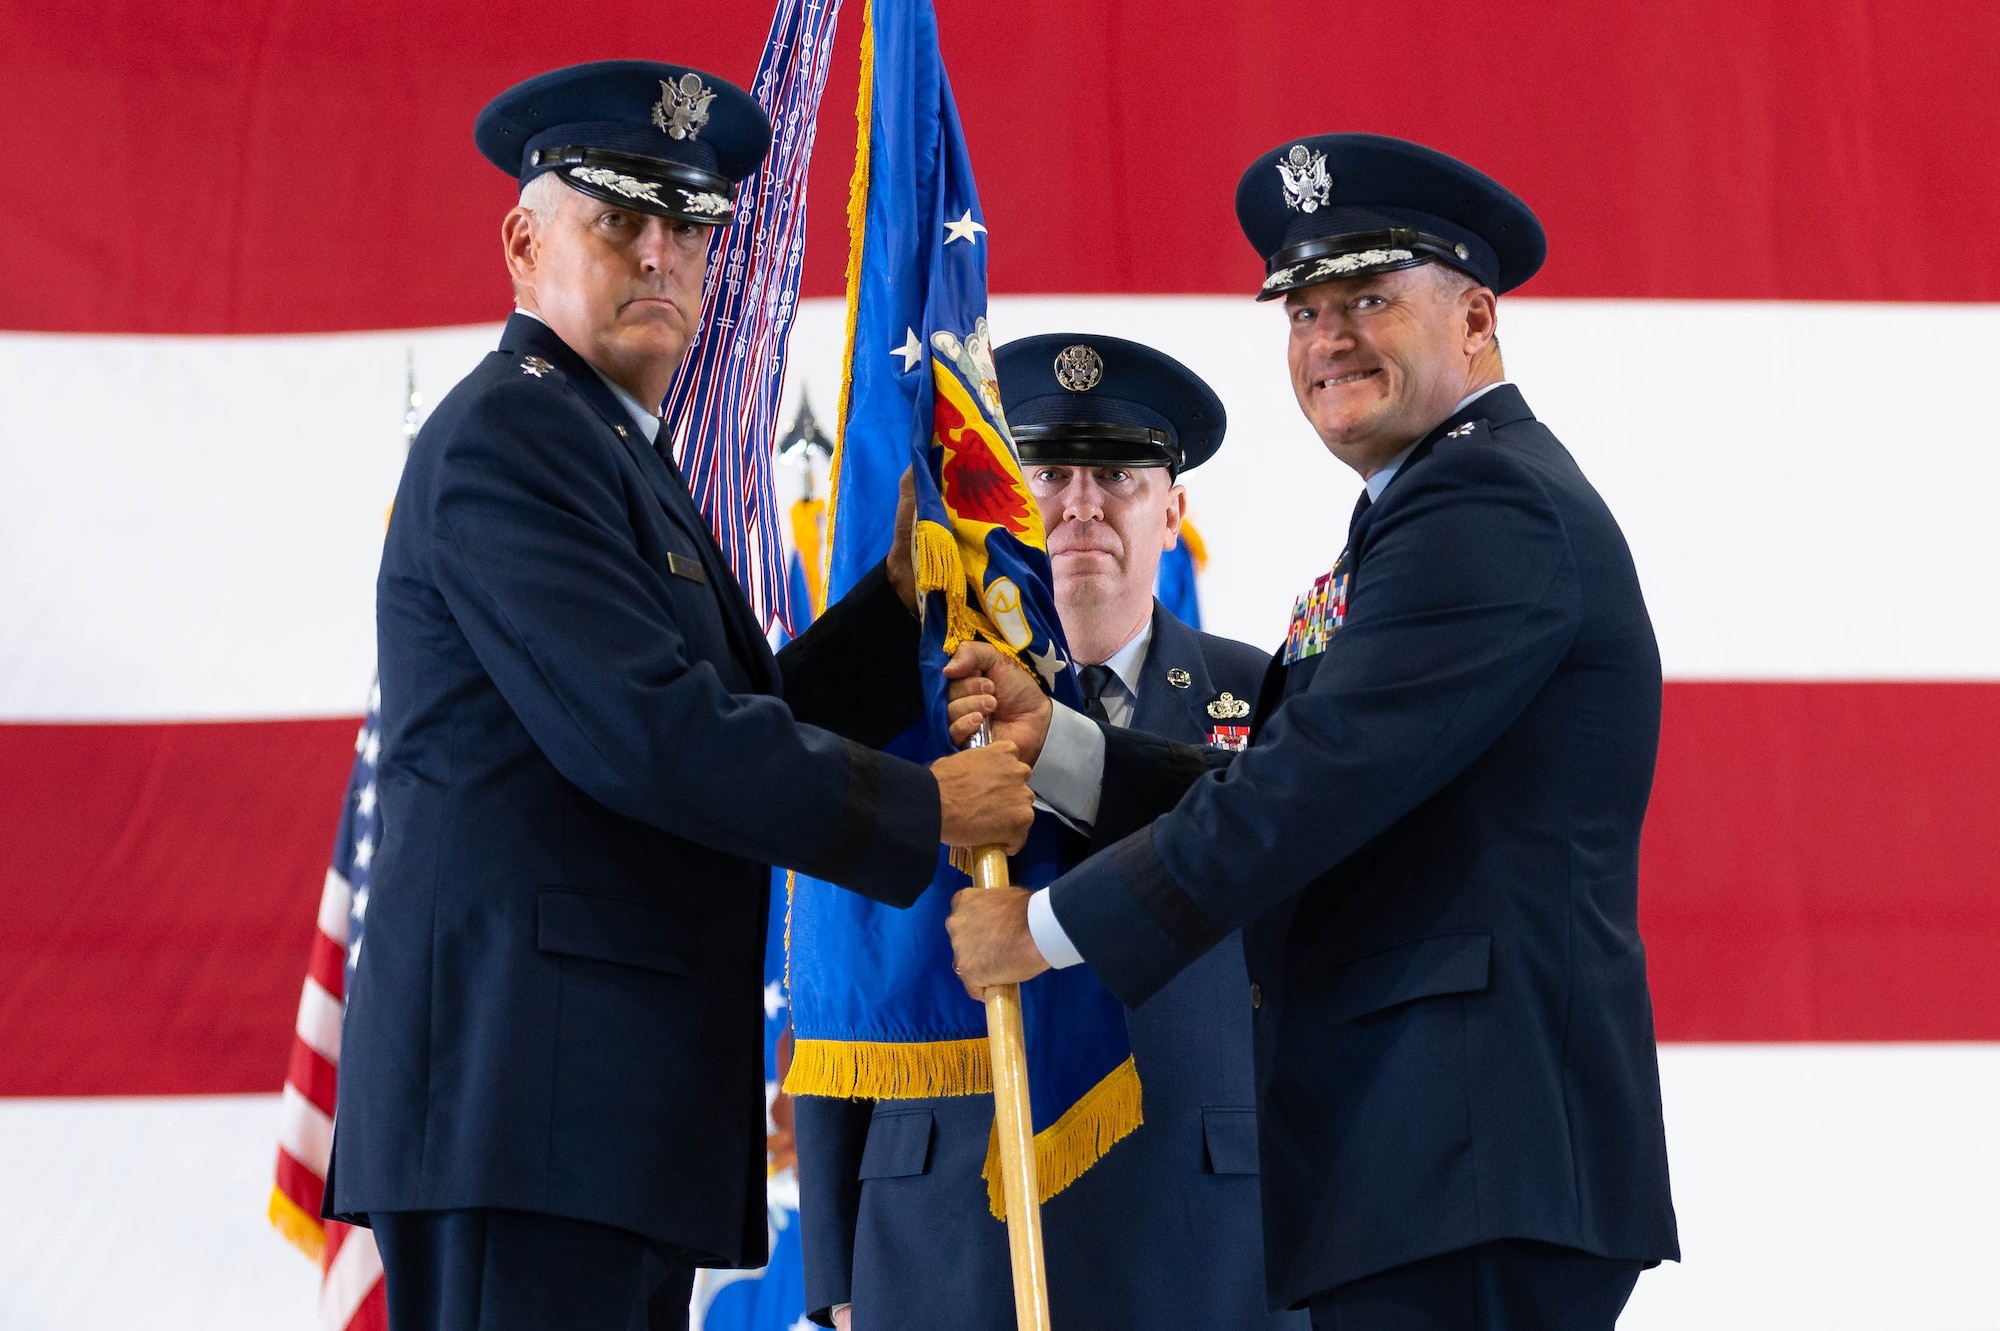 U.S. Air Force Gen. Mike Minihan, Air Mobility Command commander, takes guidon from Maj. Gen. Kenneth Bibb Jr., outgoing 18th Air Force commander, during a change of command ceremony